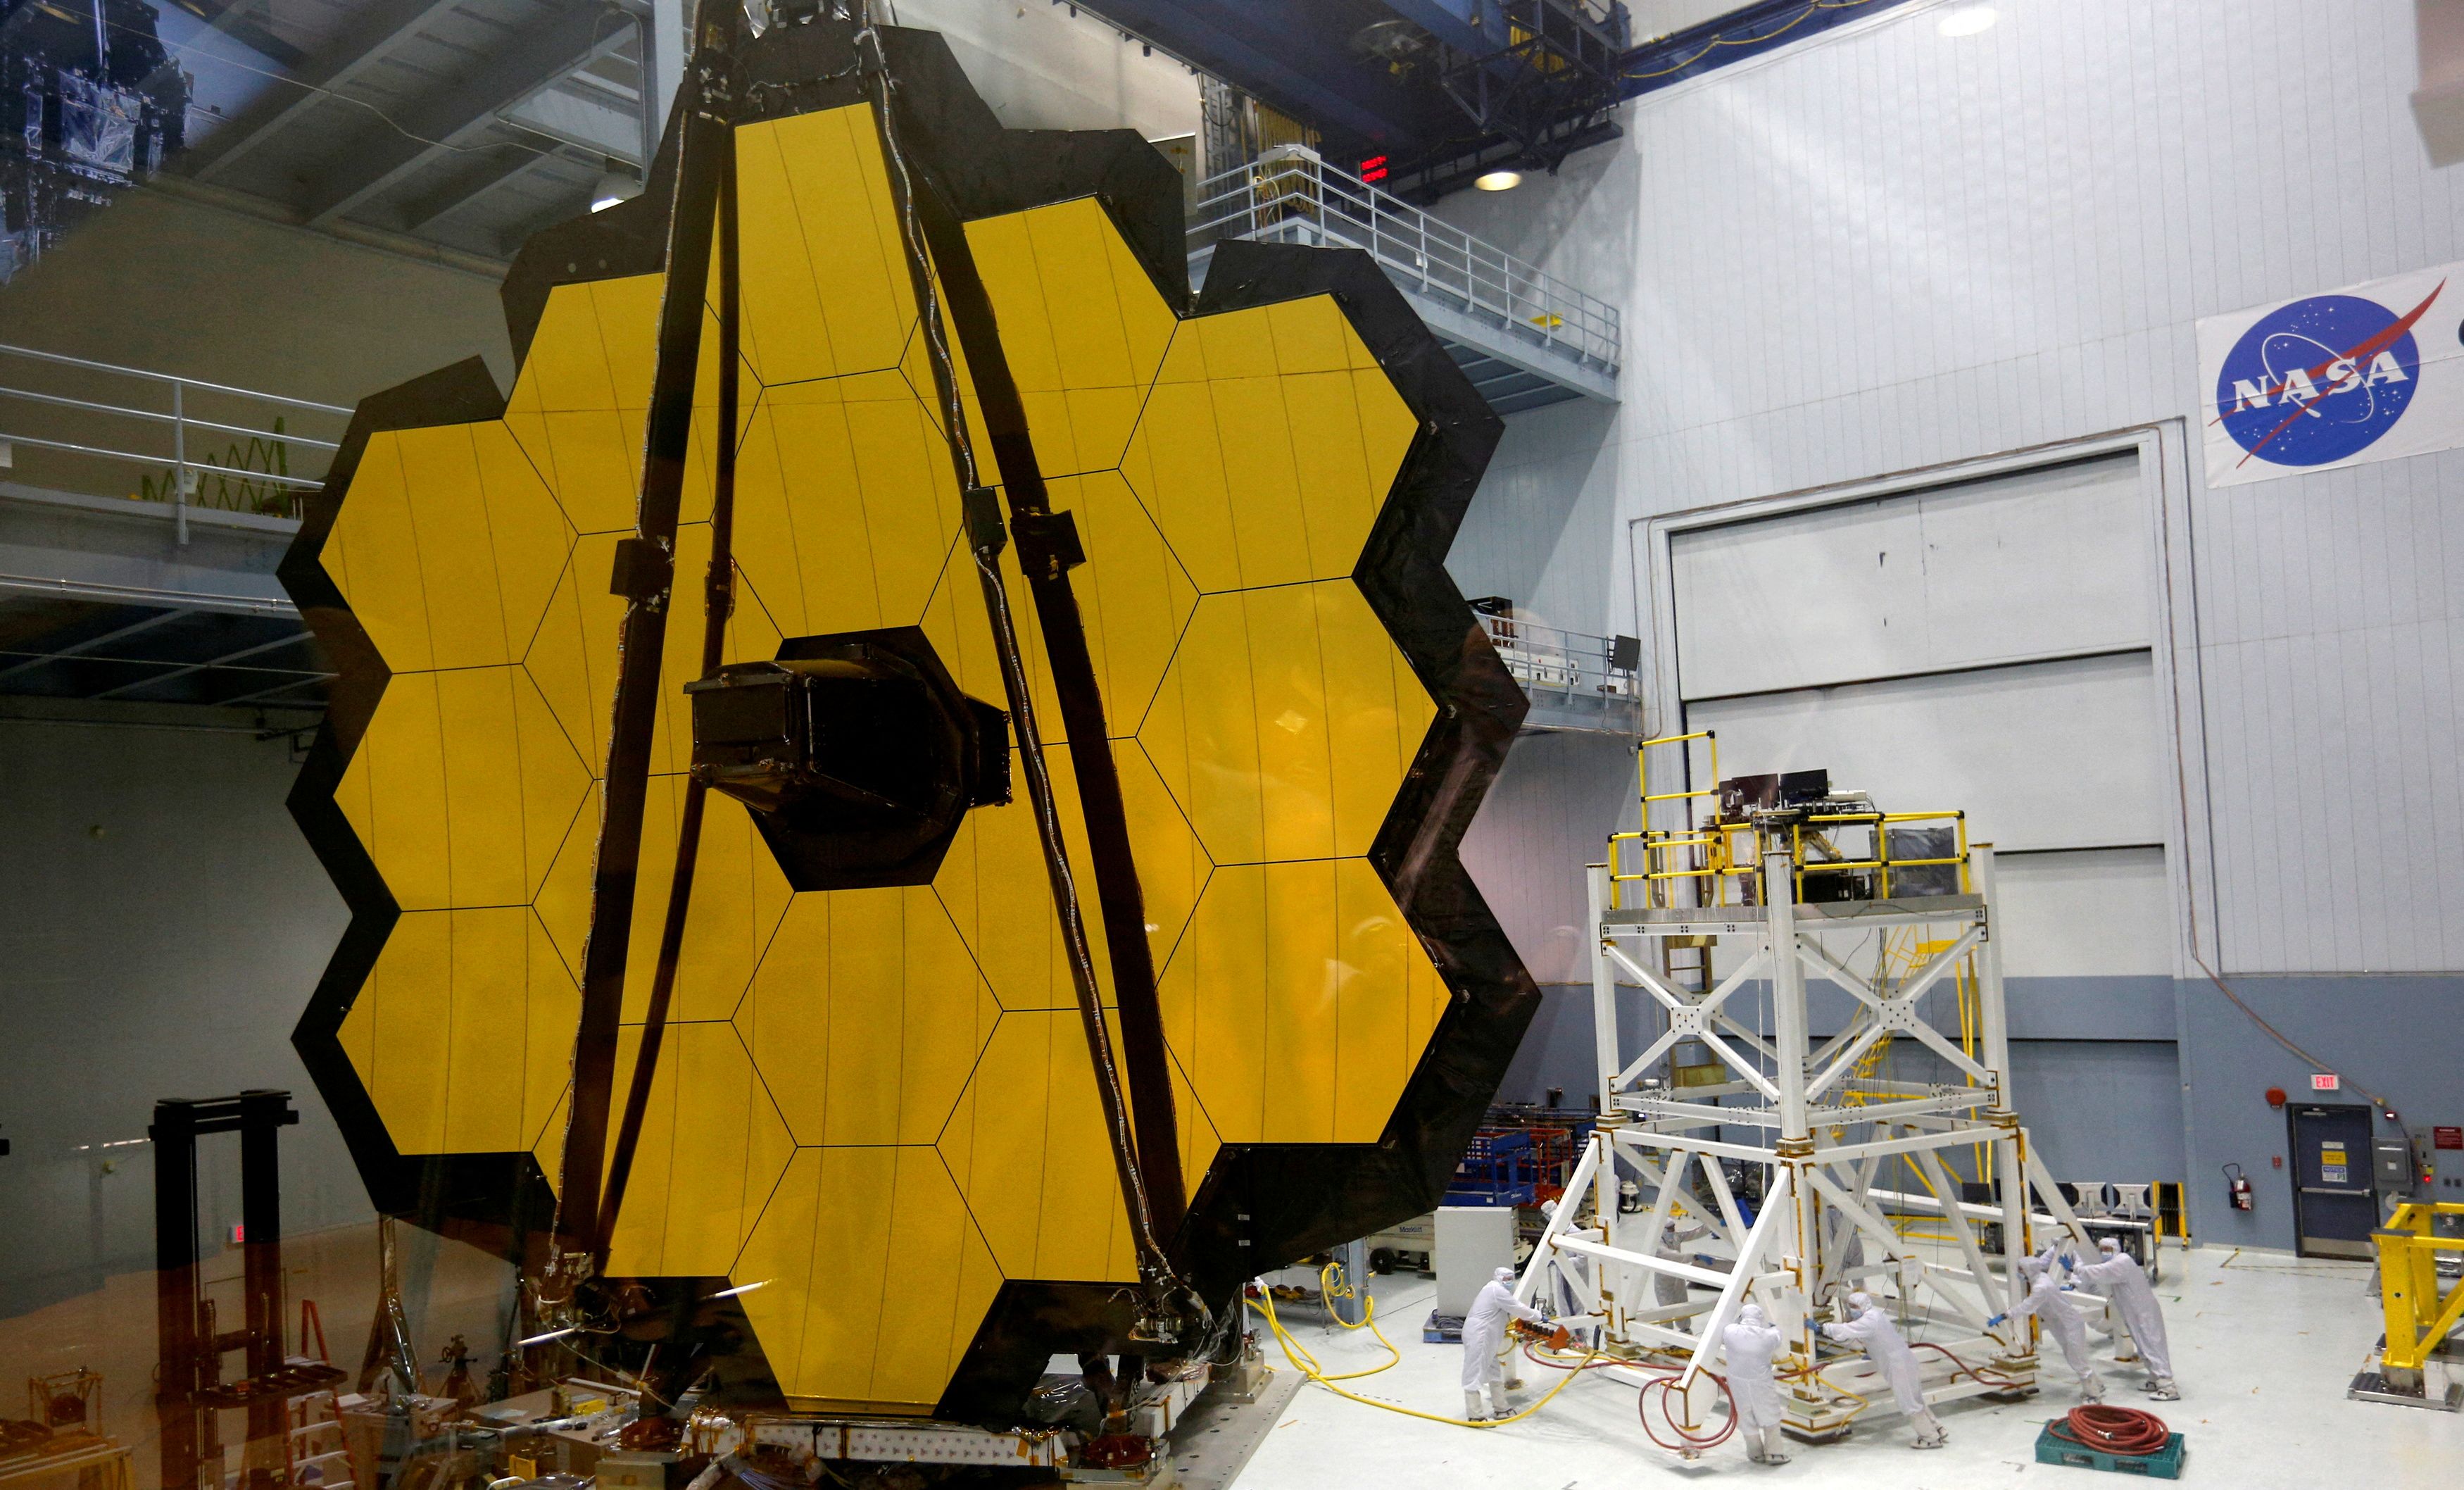 James Webb Space Telescope Mirror unveiling event at NASA's Goddard Space Flight Center in Greenbelt, Maryland